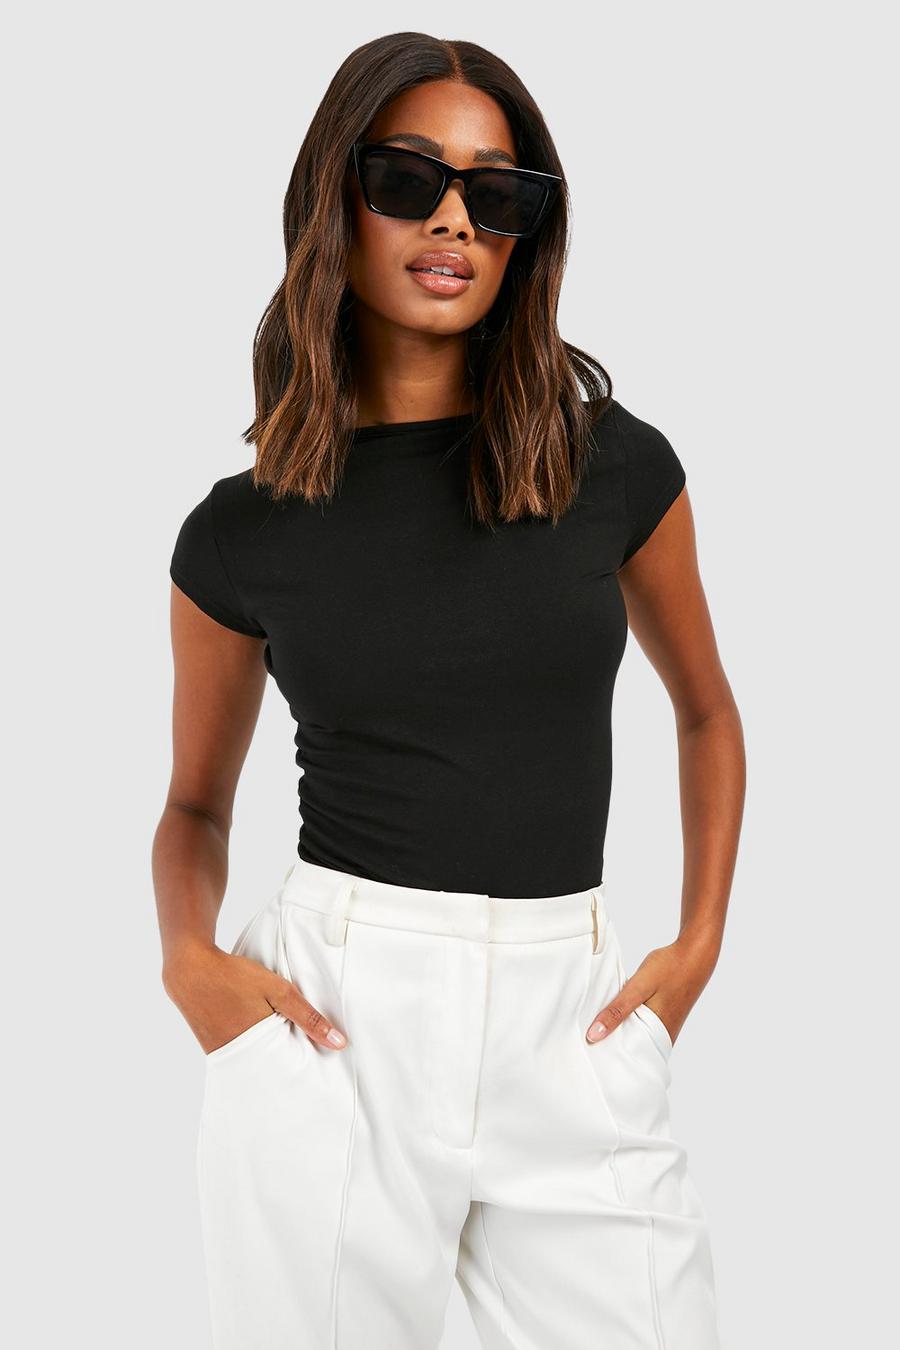 DIRASS Going Out Tops Backless Womens Long Sleeve Black Crop Top for Women  Y2K Open Back Spring Shirts S, Black at  Women's Clothing store